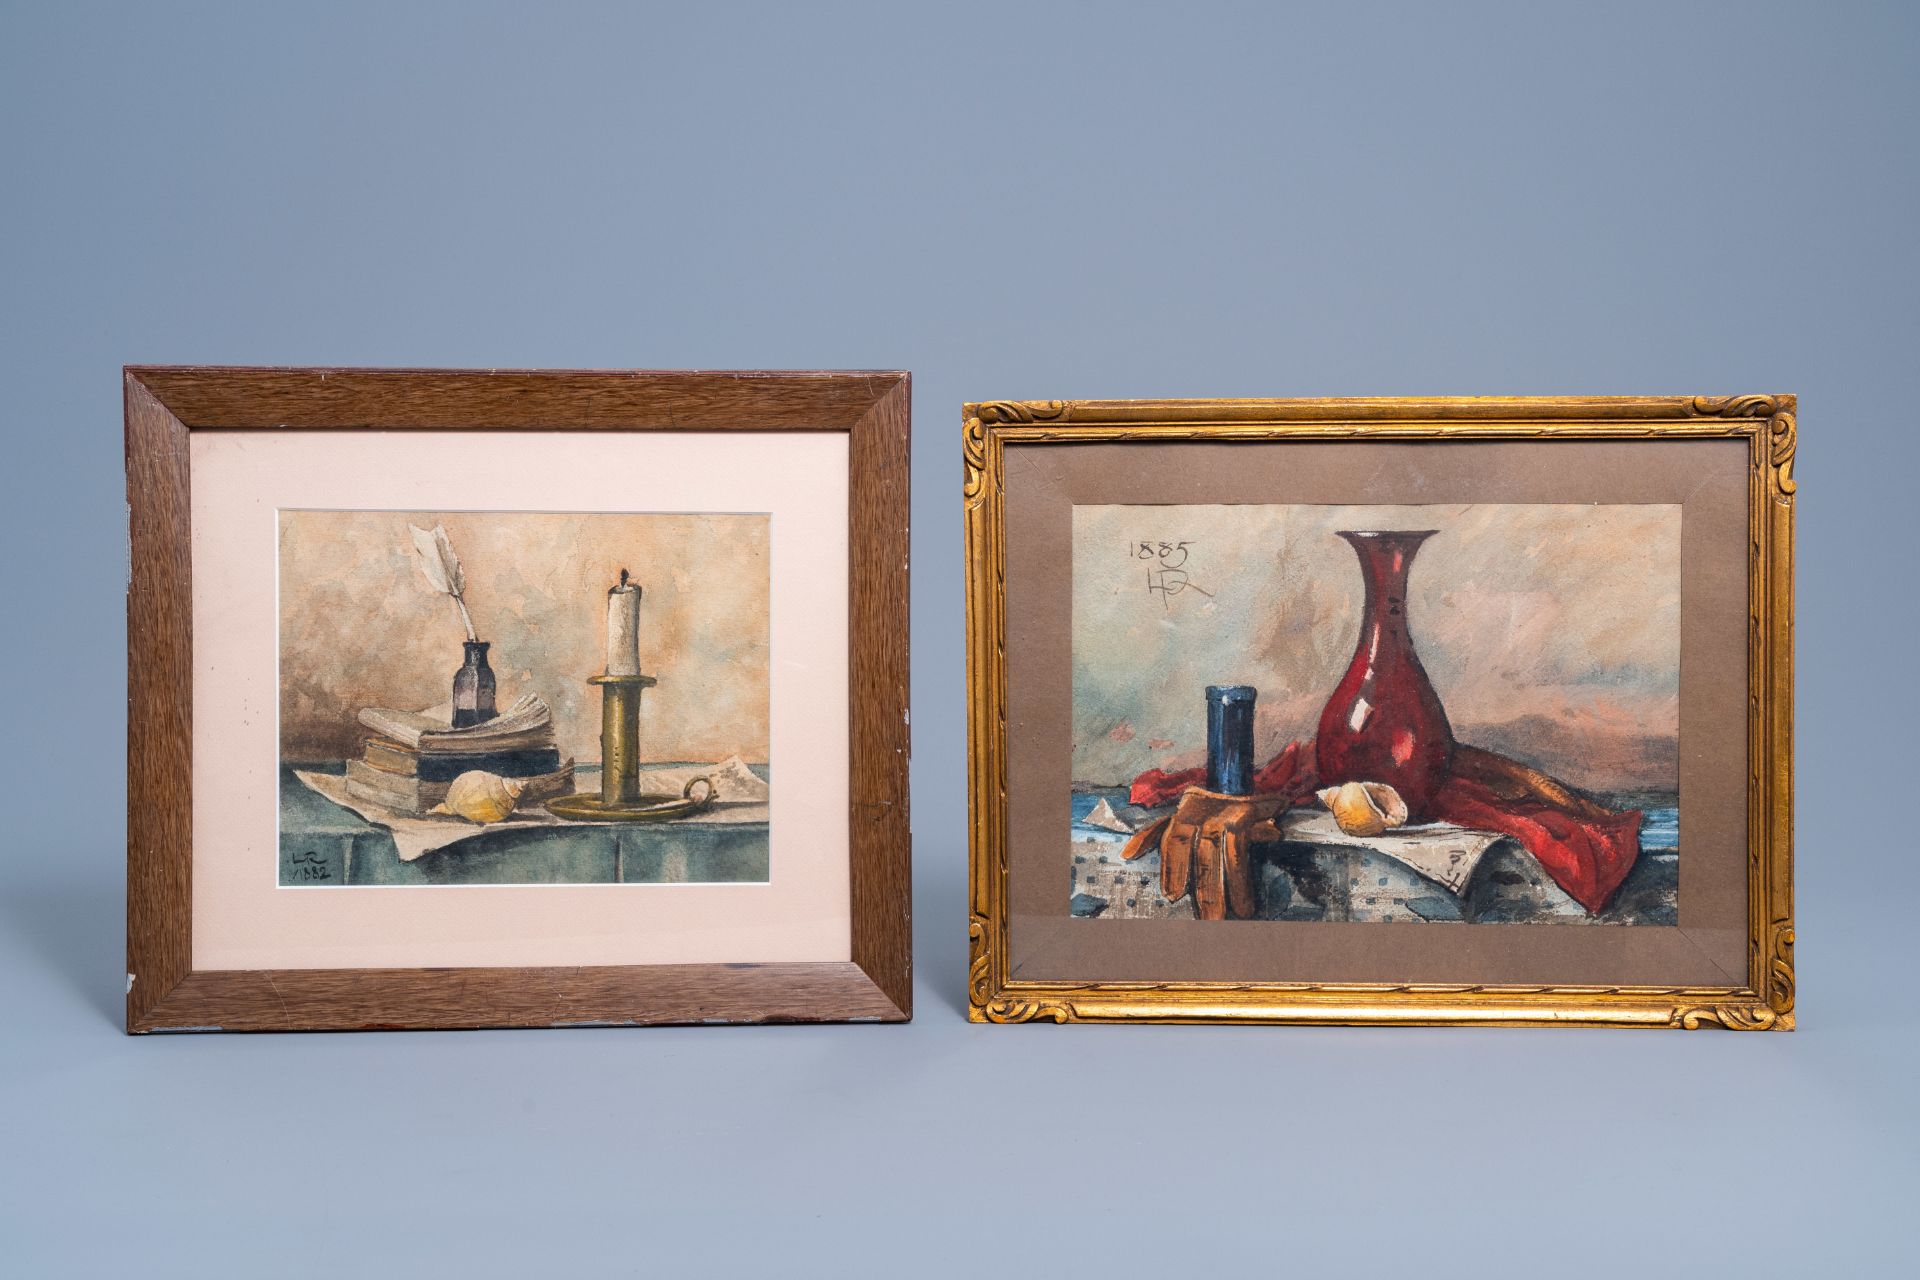 Louis Joseph Reckelbus (1864-1958): Two still lifes, mixed media on paper, dated 1882 and 1885